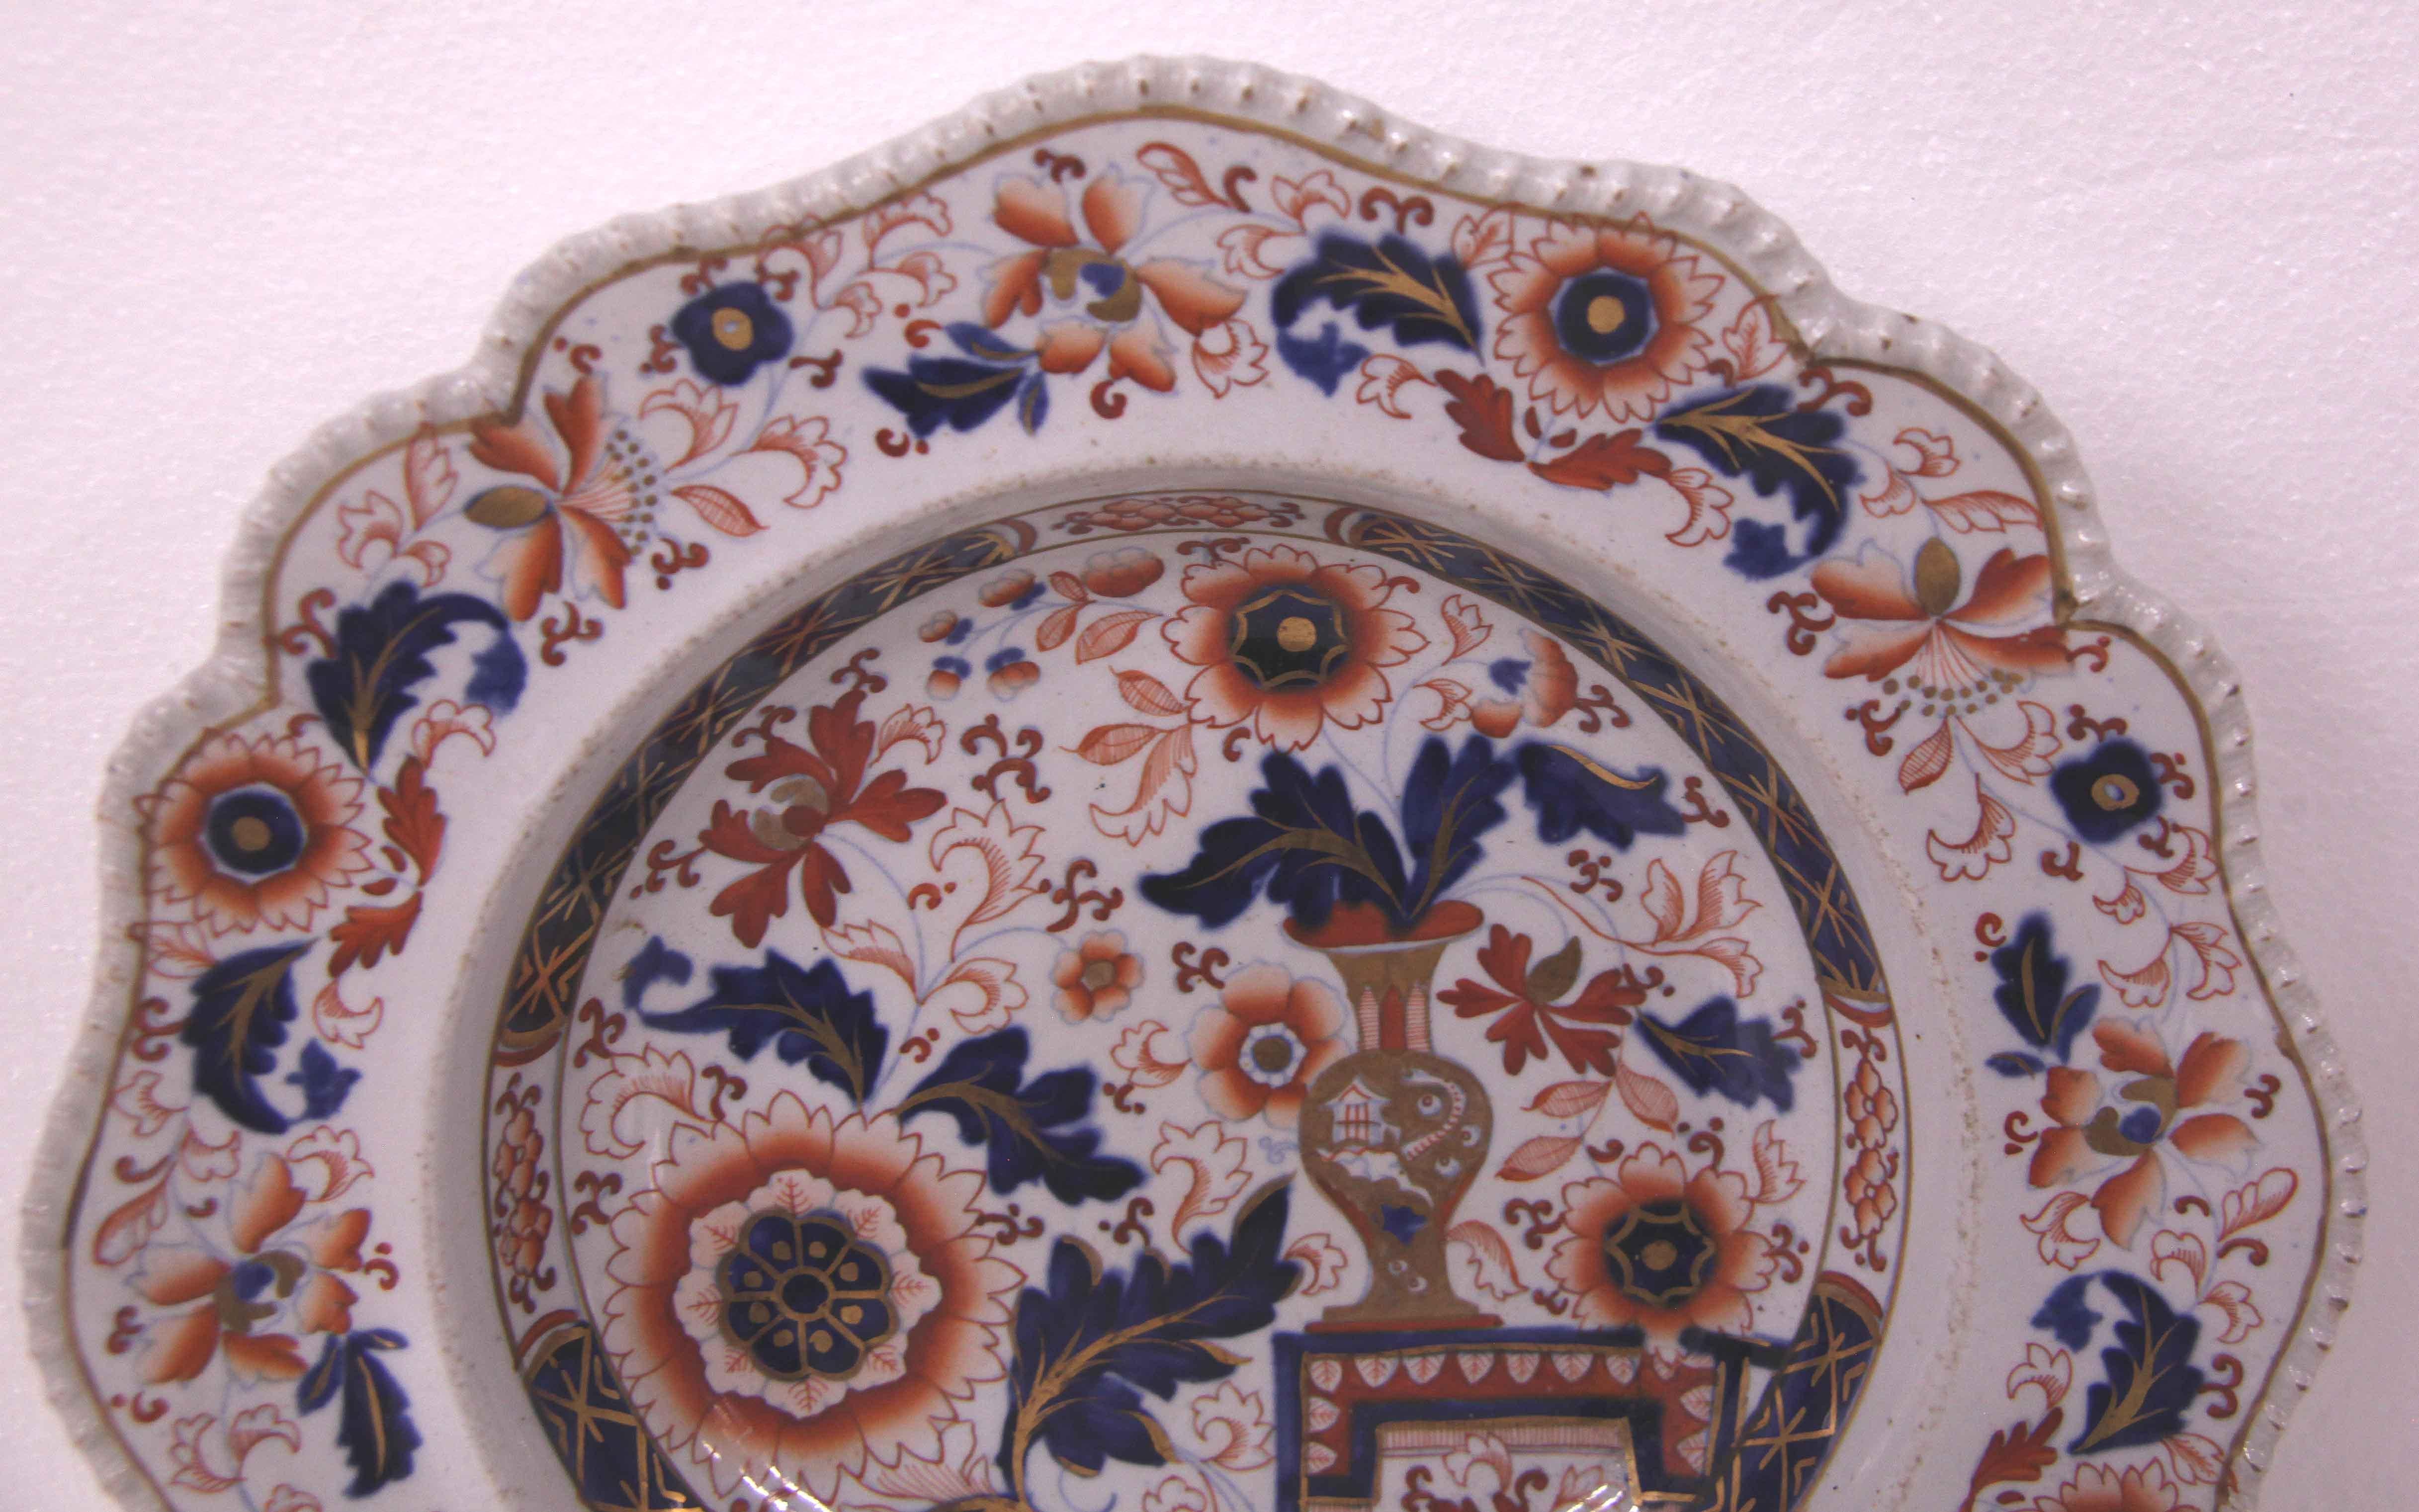 Pair of English ironstone soup plates, with a scalloped and beaded rim, the border has a repeating pattern of stylized flowers and foliate, the interior of the plate features a variety of flowers and foliate and a gilded vase sitting on a plinth. On